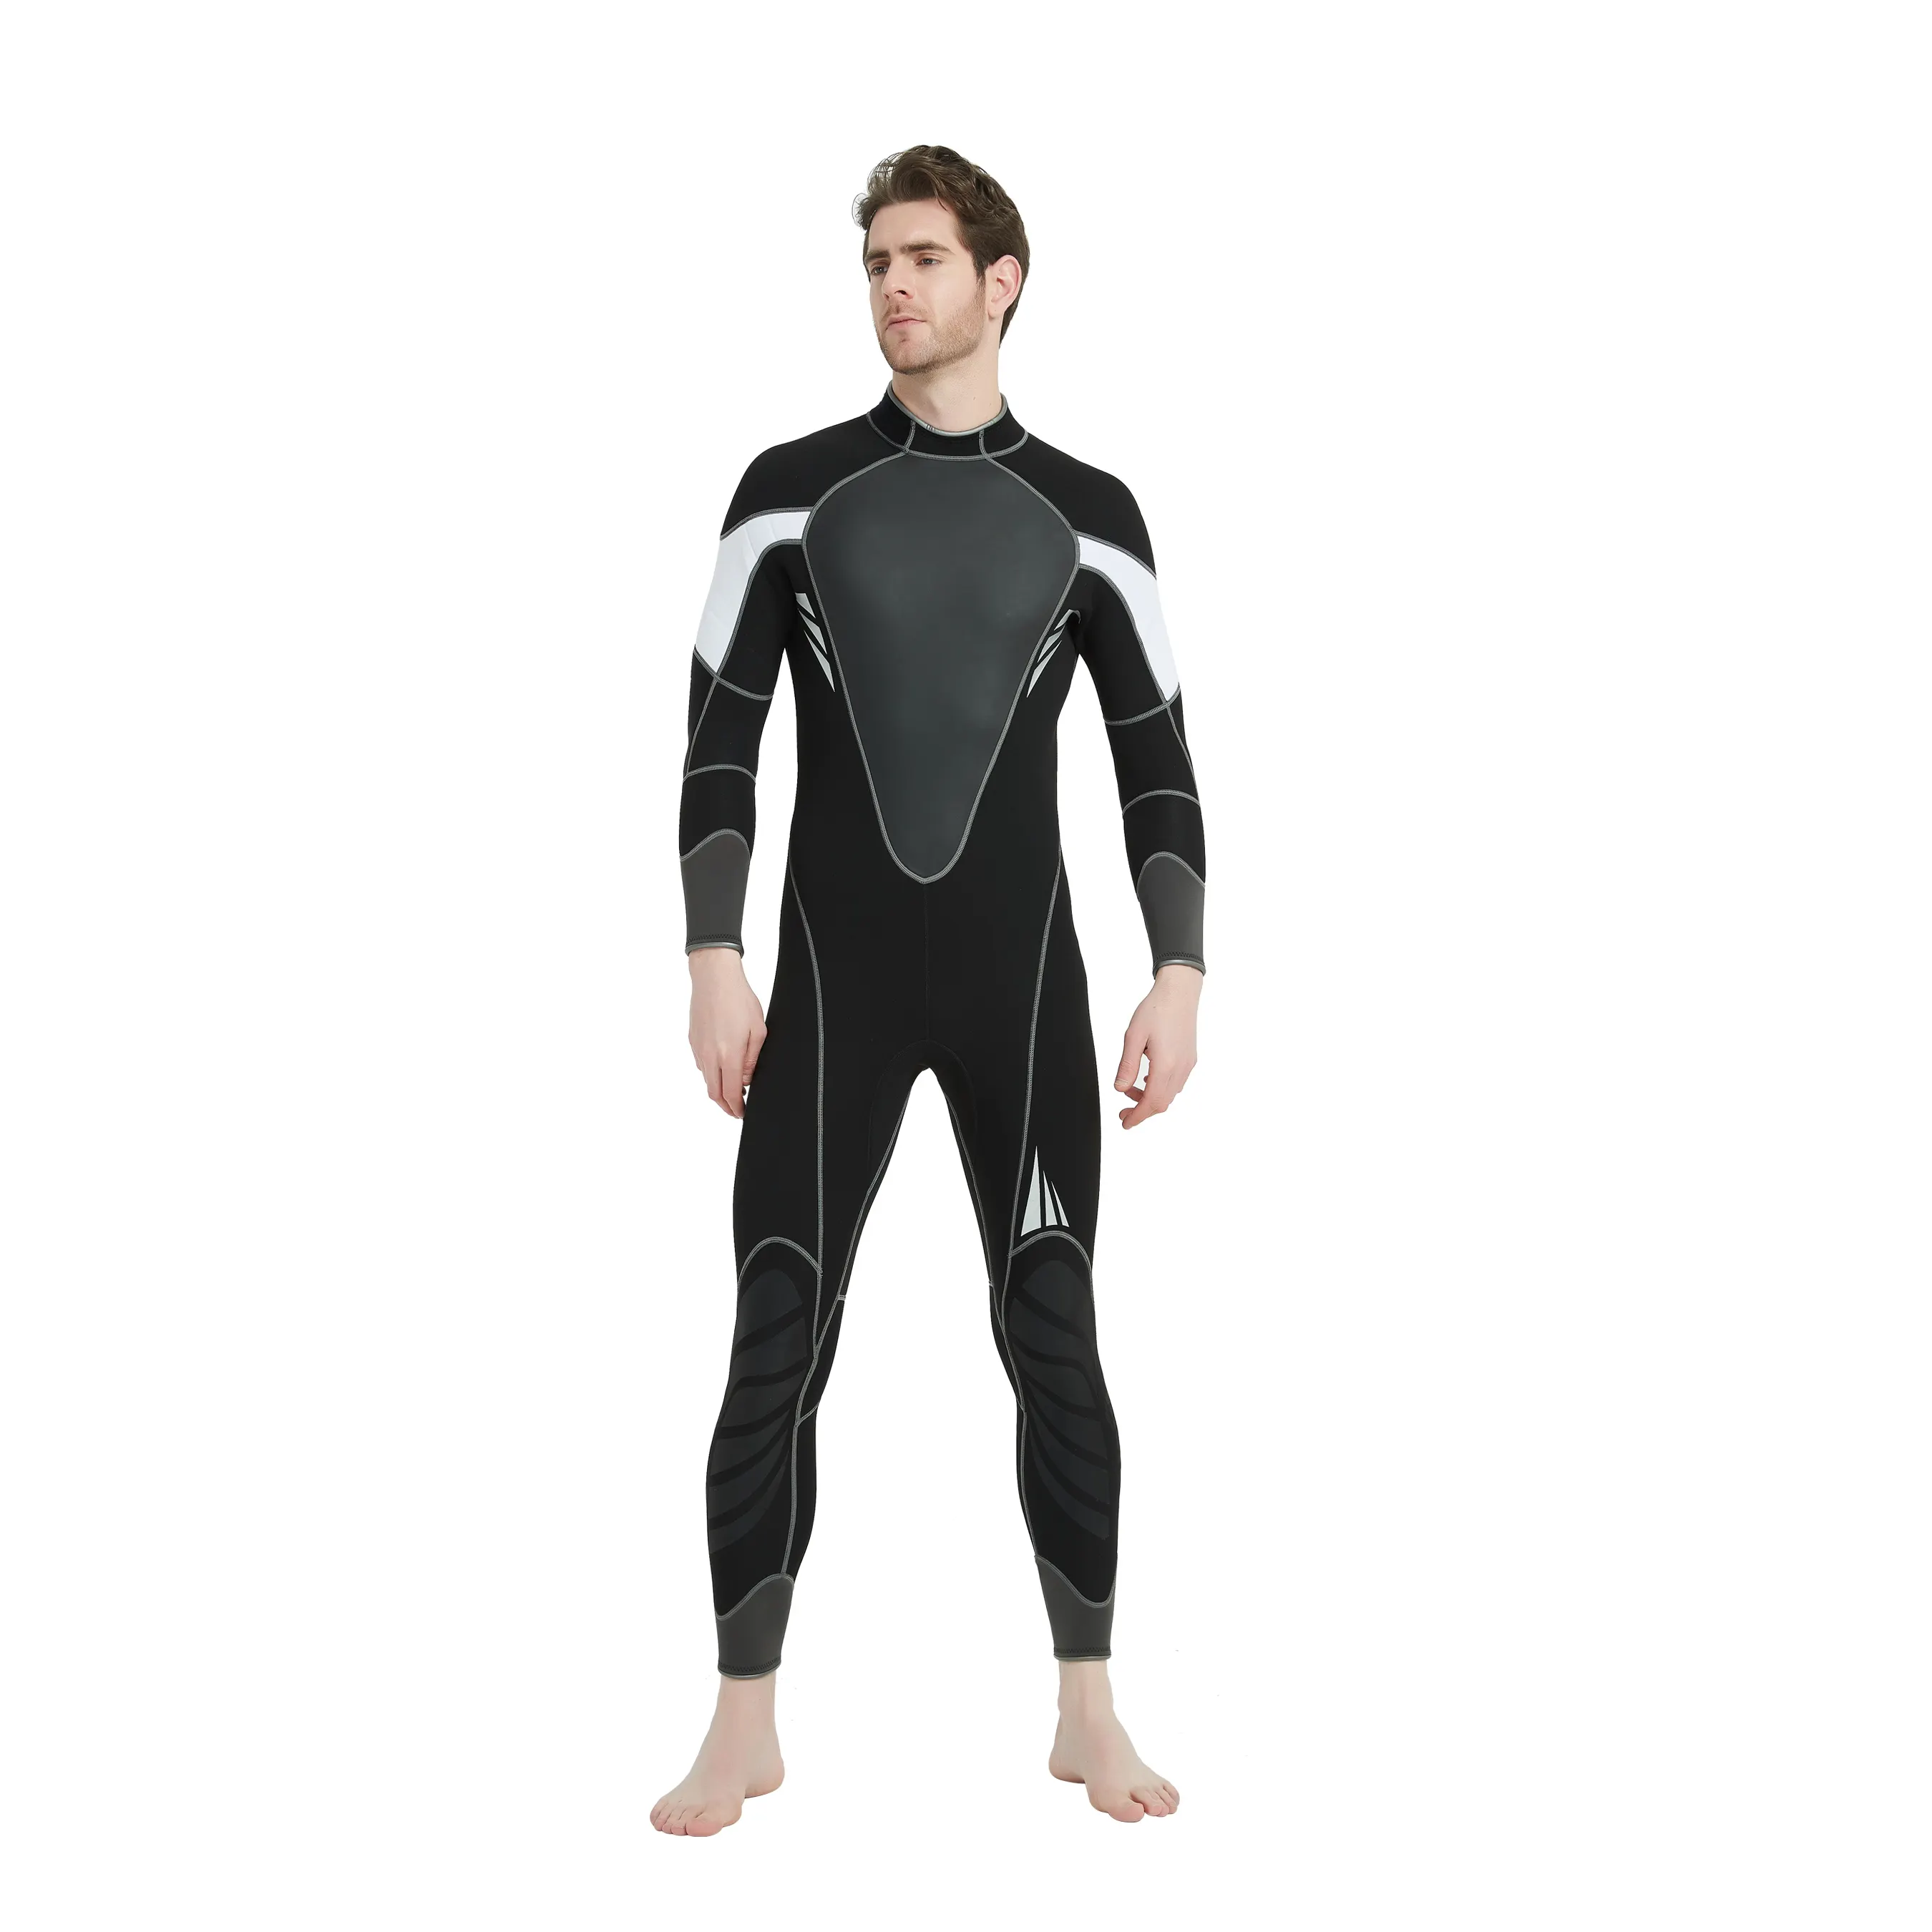 Neoprene swimming suit 2mm and 3mm neoprene surfing wetsuits for men and lady